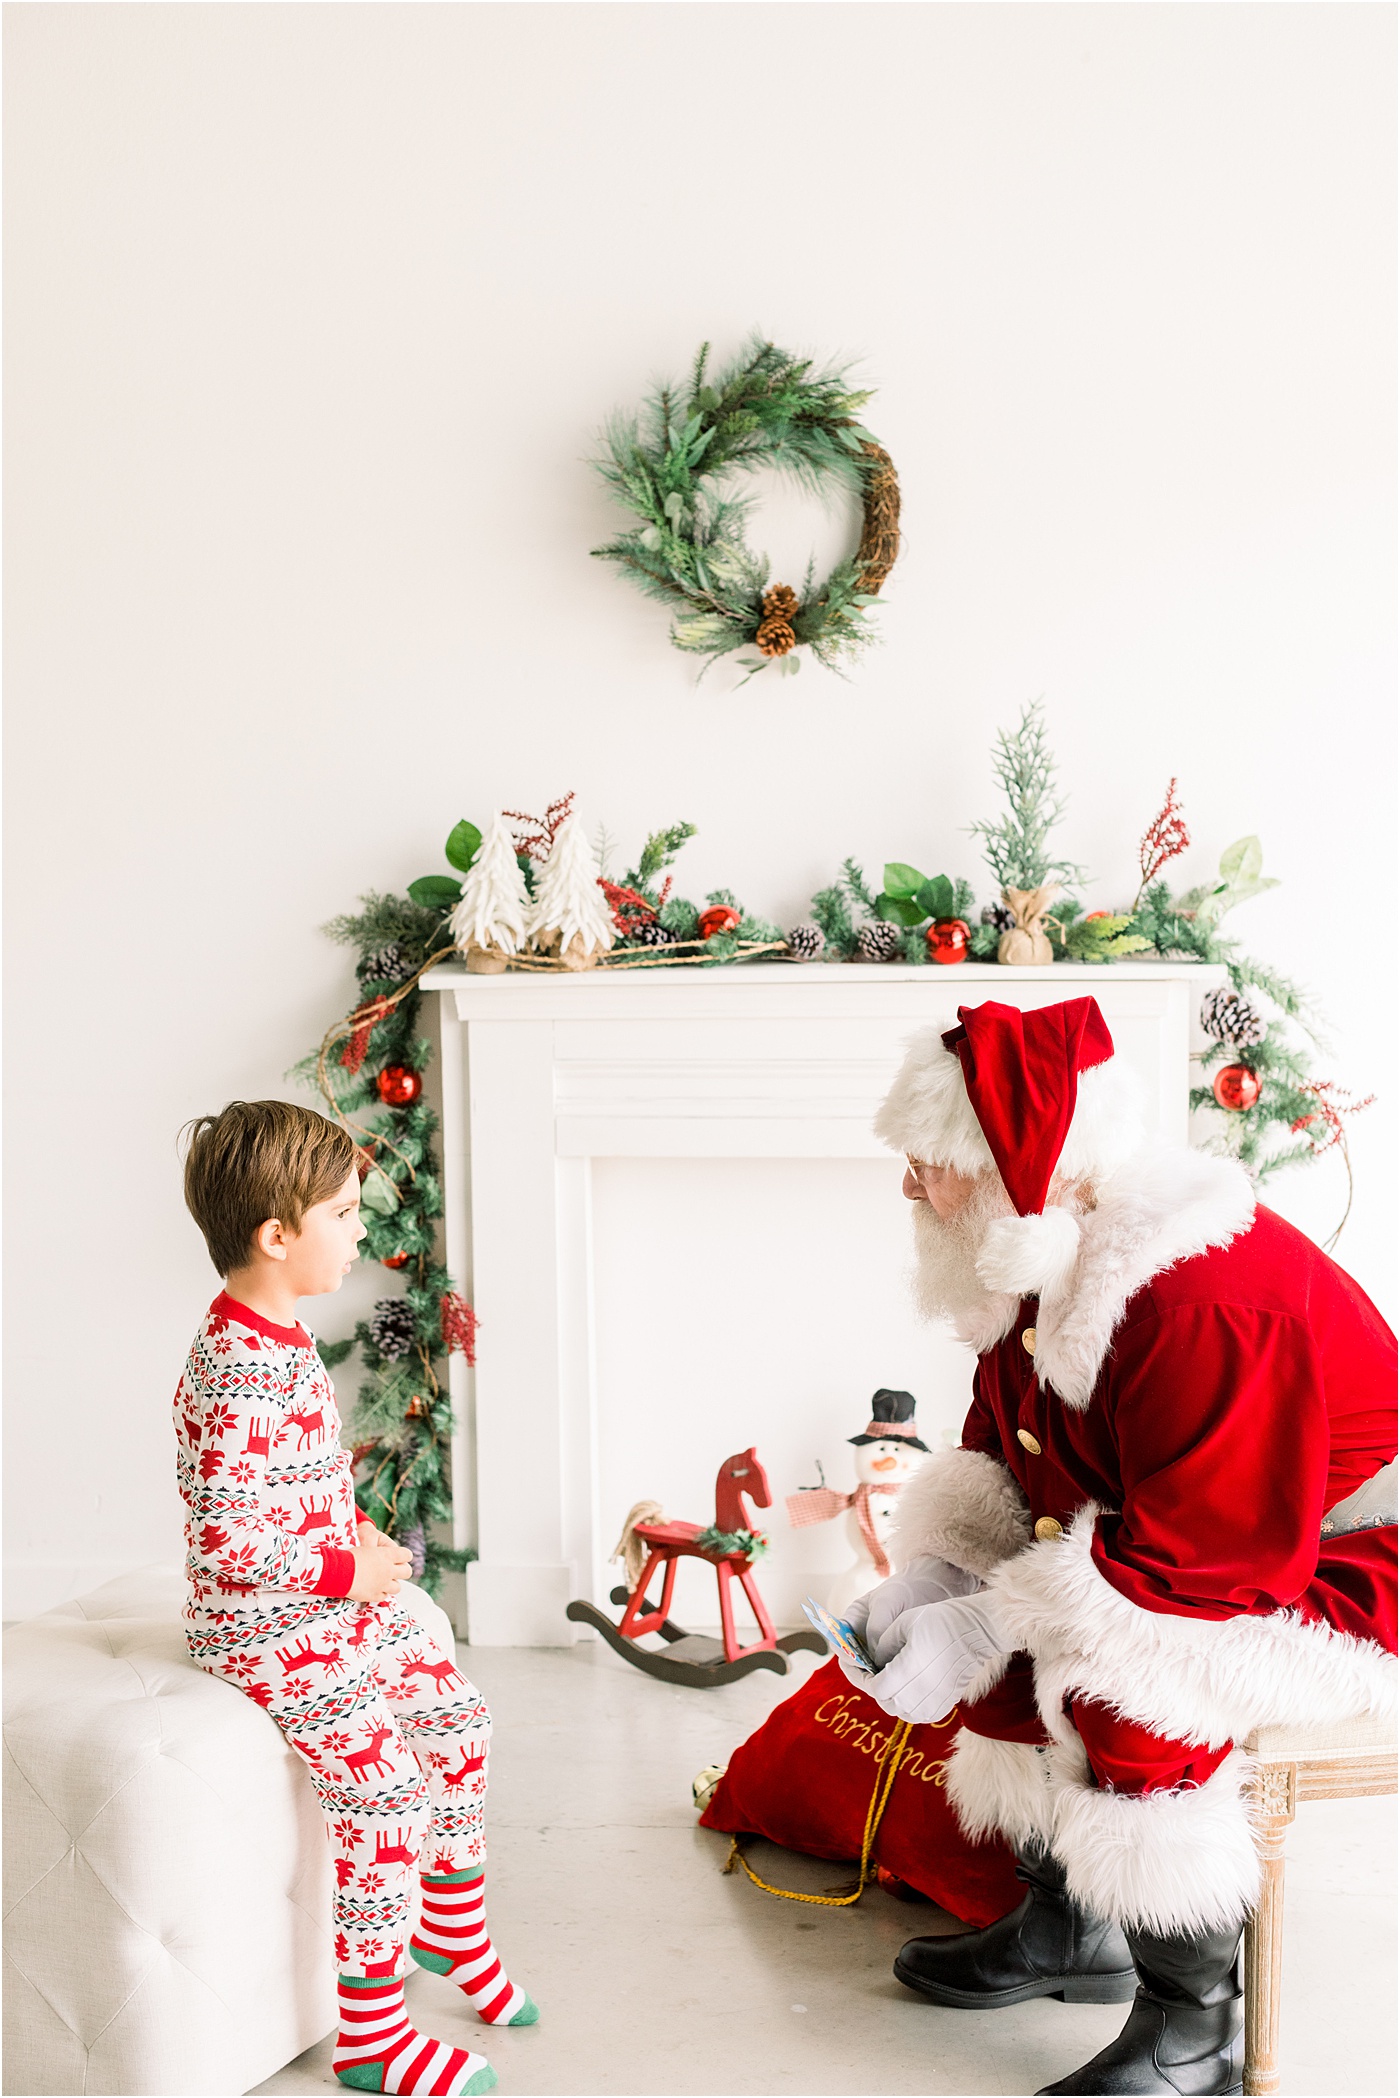 Santa talking with little boy who is wearing Christmas pajamas during mini session event with Sana Ahmed Photography.